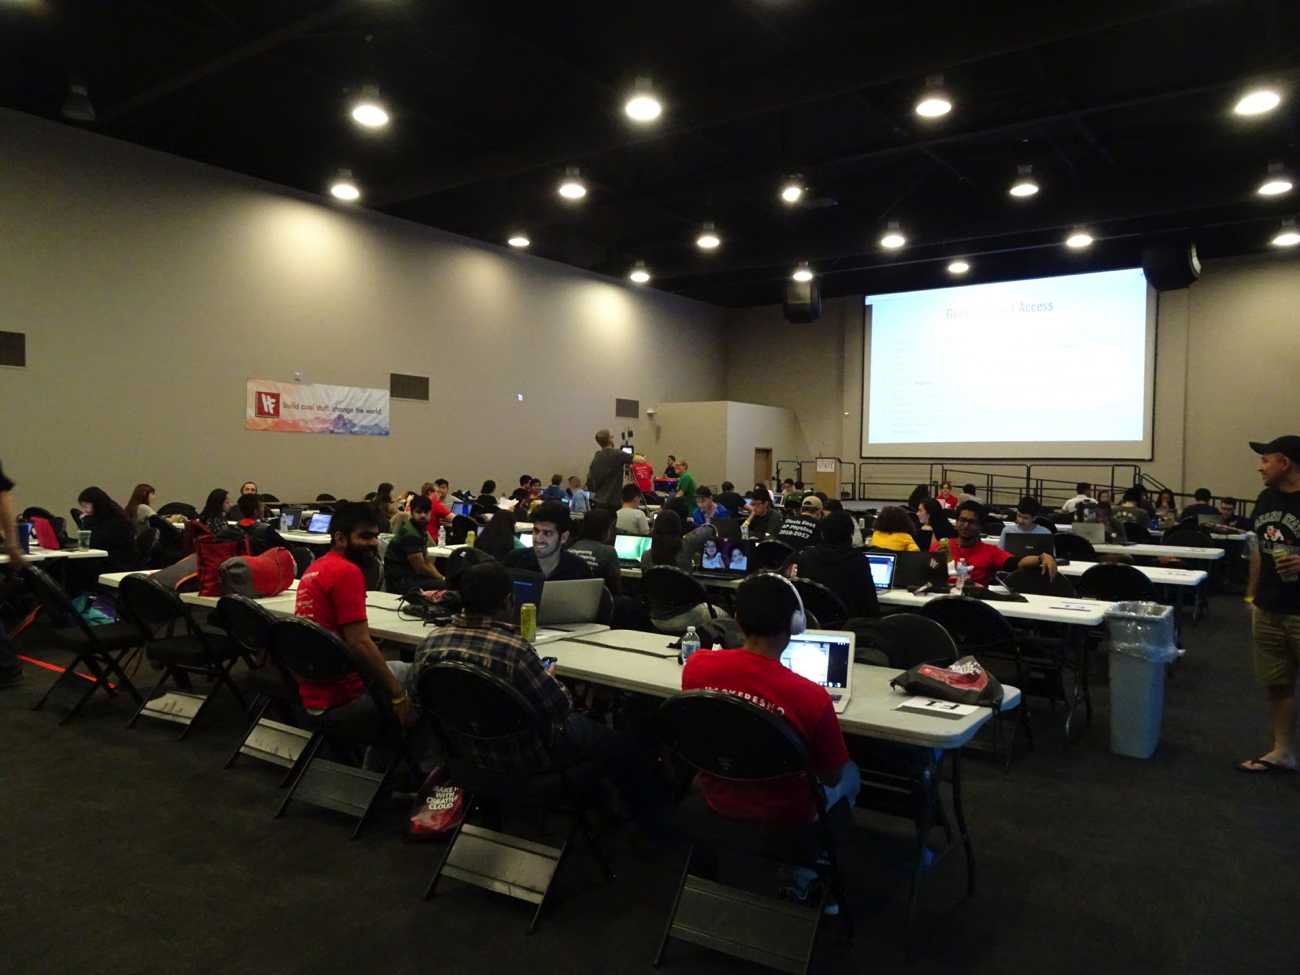 Students and staff get ready to start the Hack Fresno Hackathon, a 36-hour long event held at Fresno State North Gym room 118 on April, 27 2018. (Jorge Rodriguez/The Collegian)